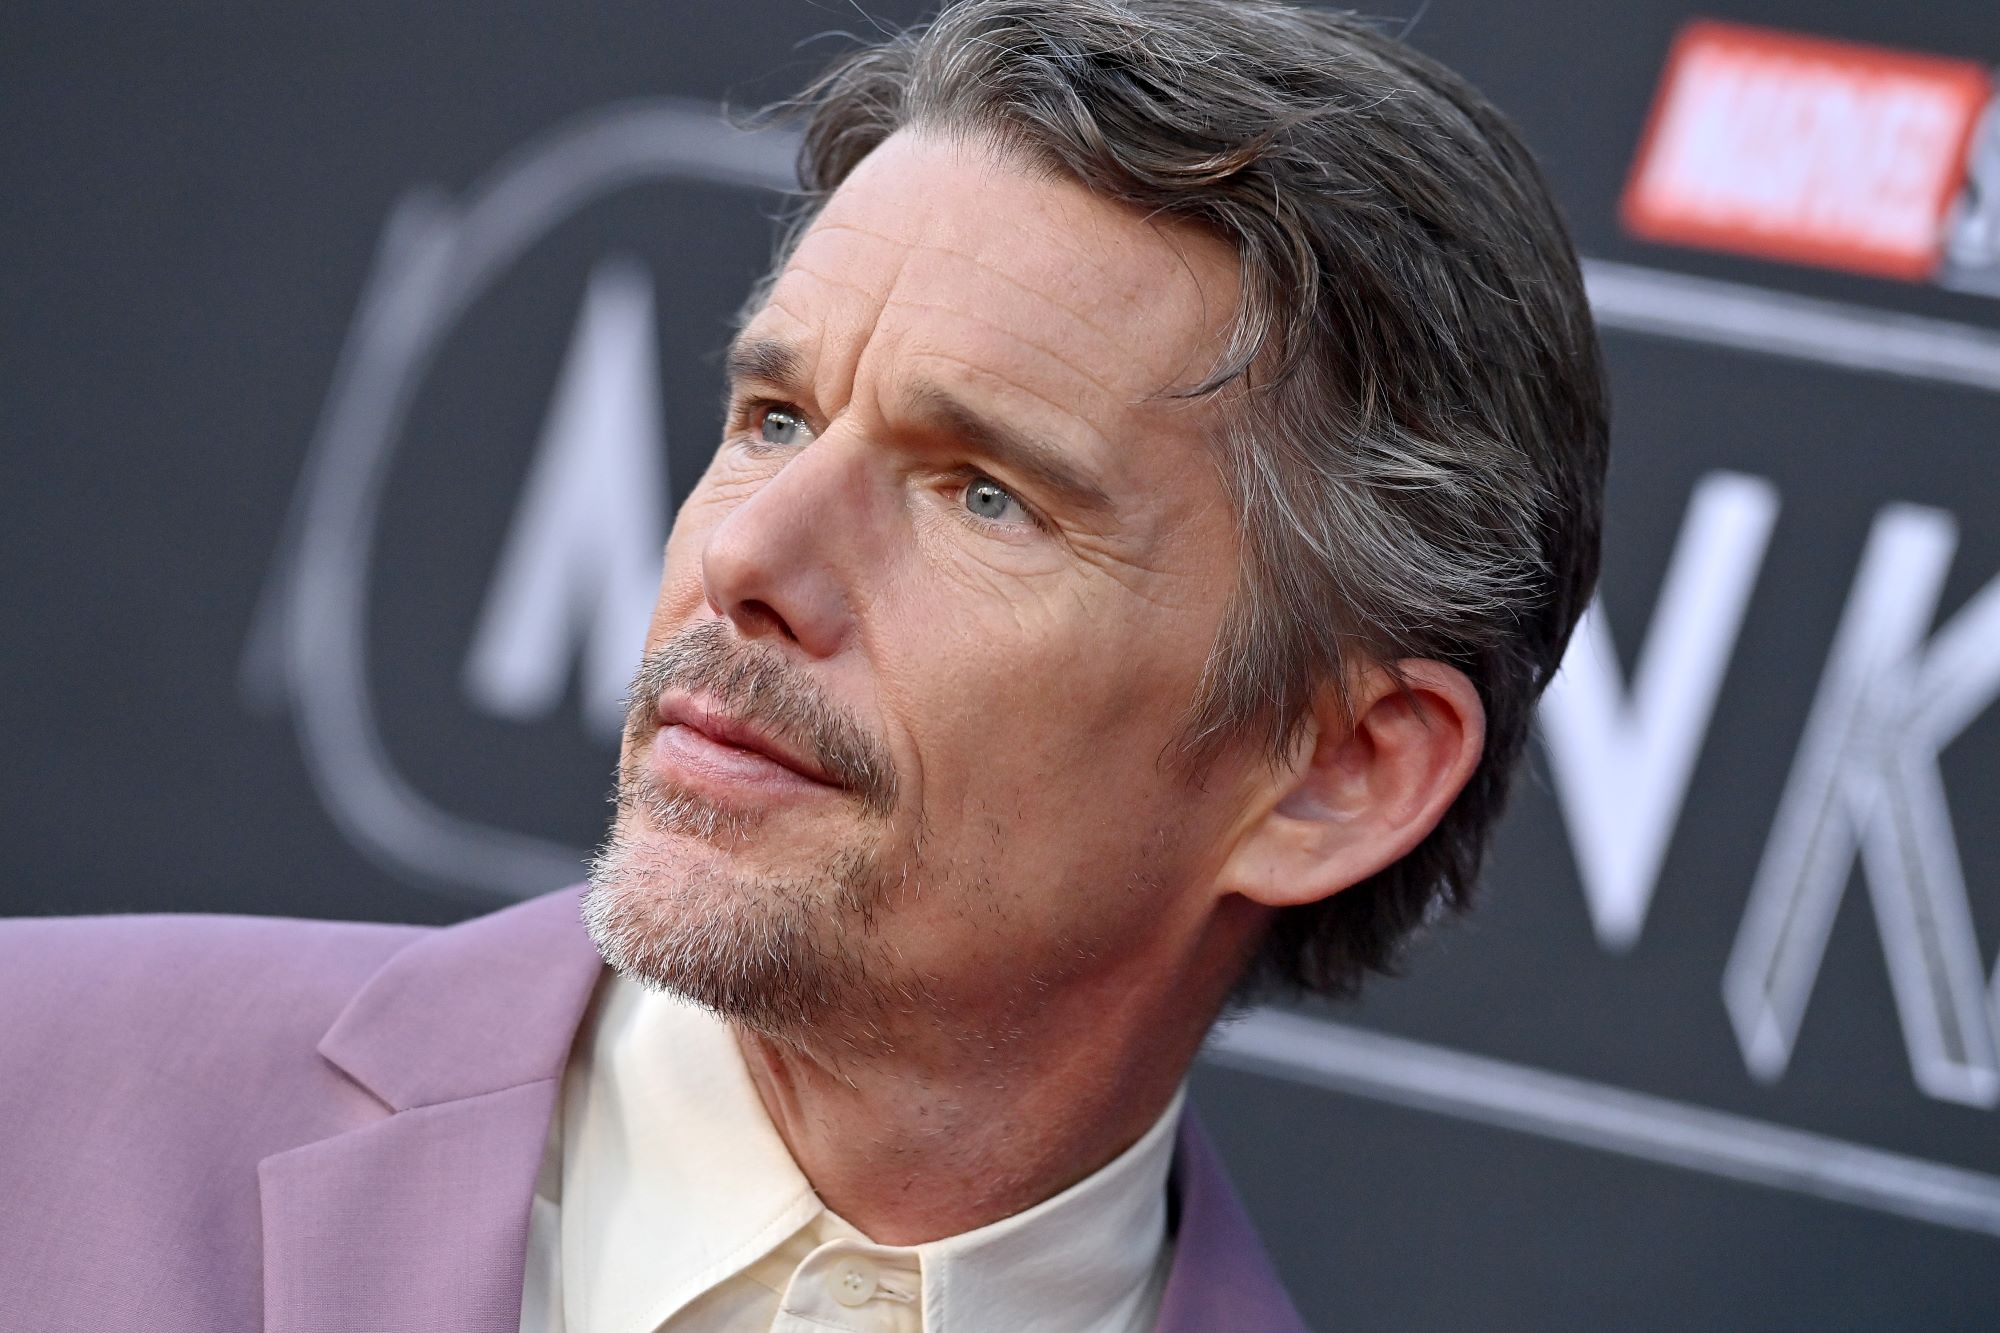 Ethan Hawke, star of 'Moon Knight,' which probably won't get a season 2, wears a light purple suit over a white button-up shirt.